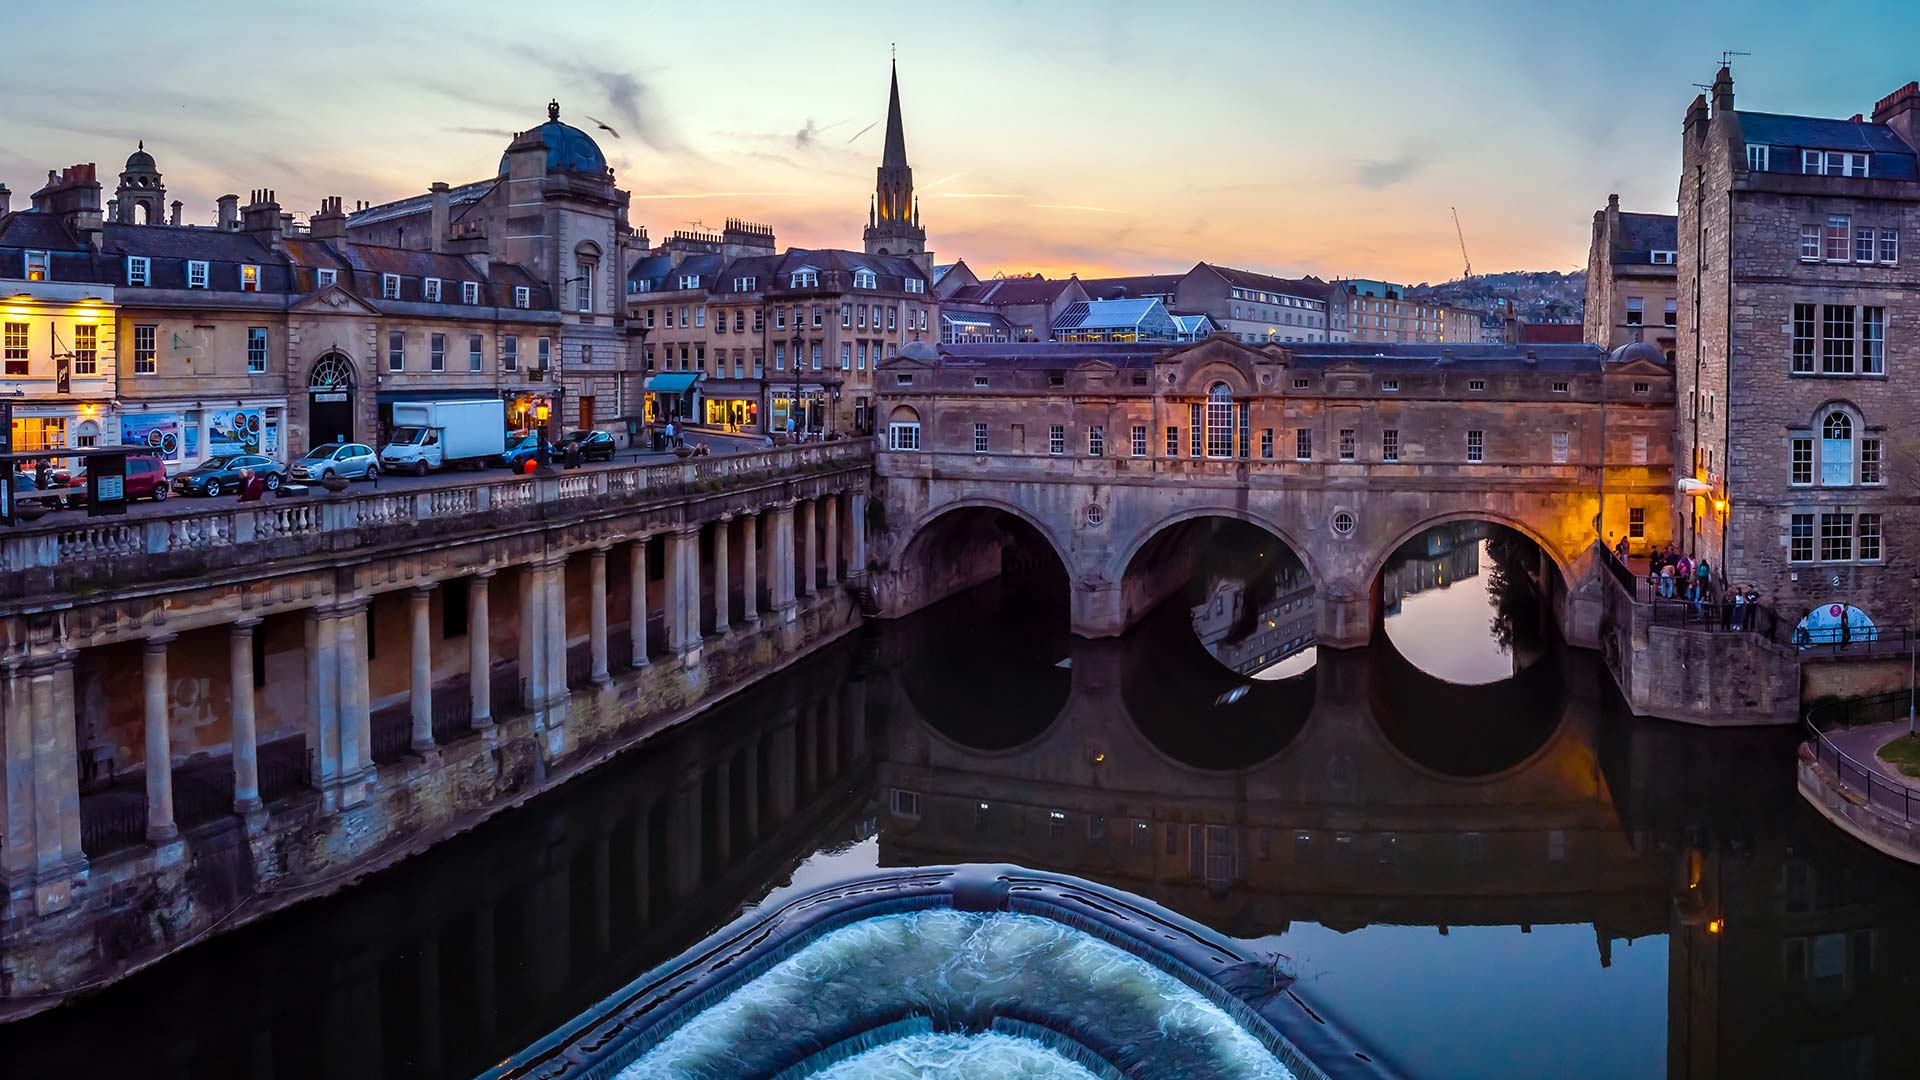 Panorama to illustrate dating in bath